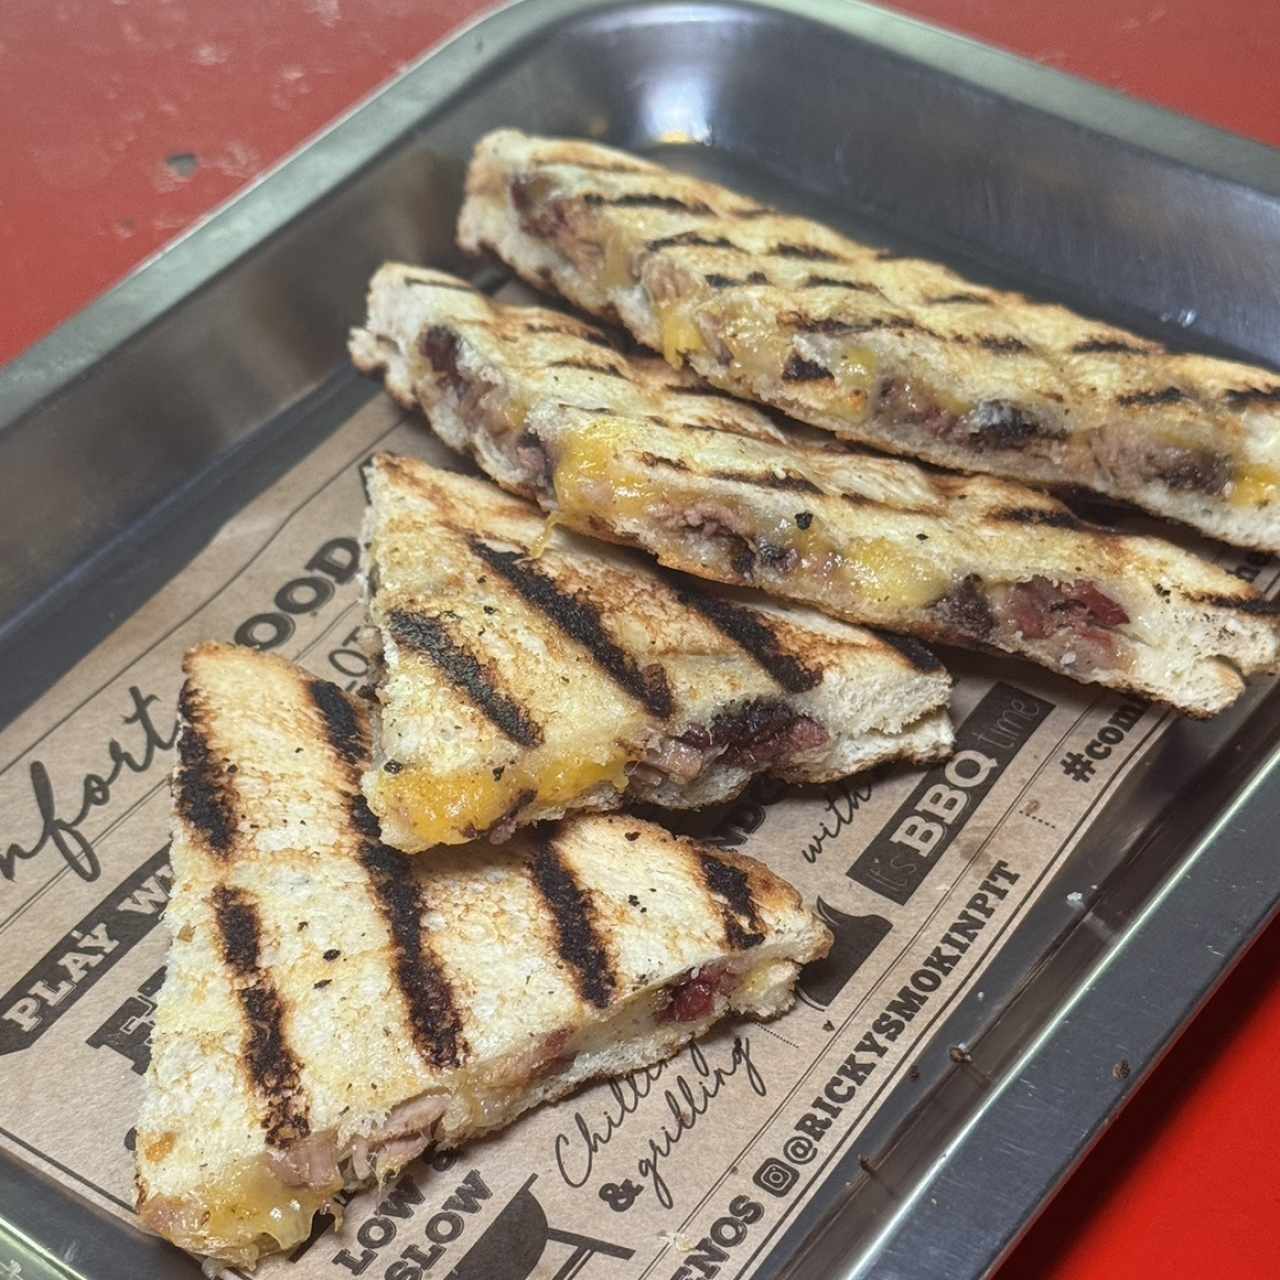 Brisket and Cheese Grilled Sandwich